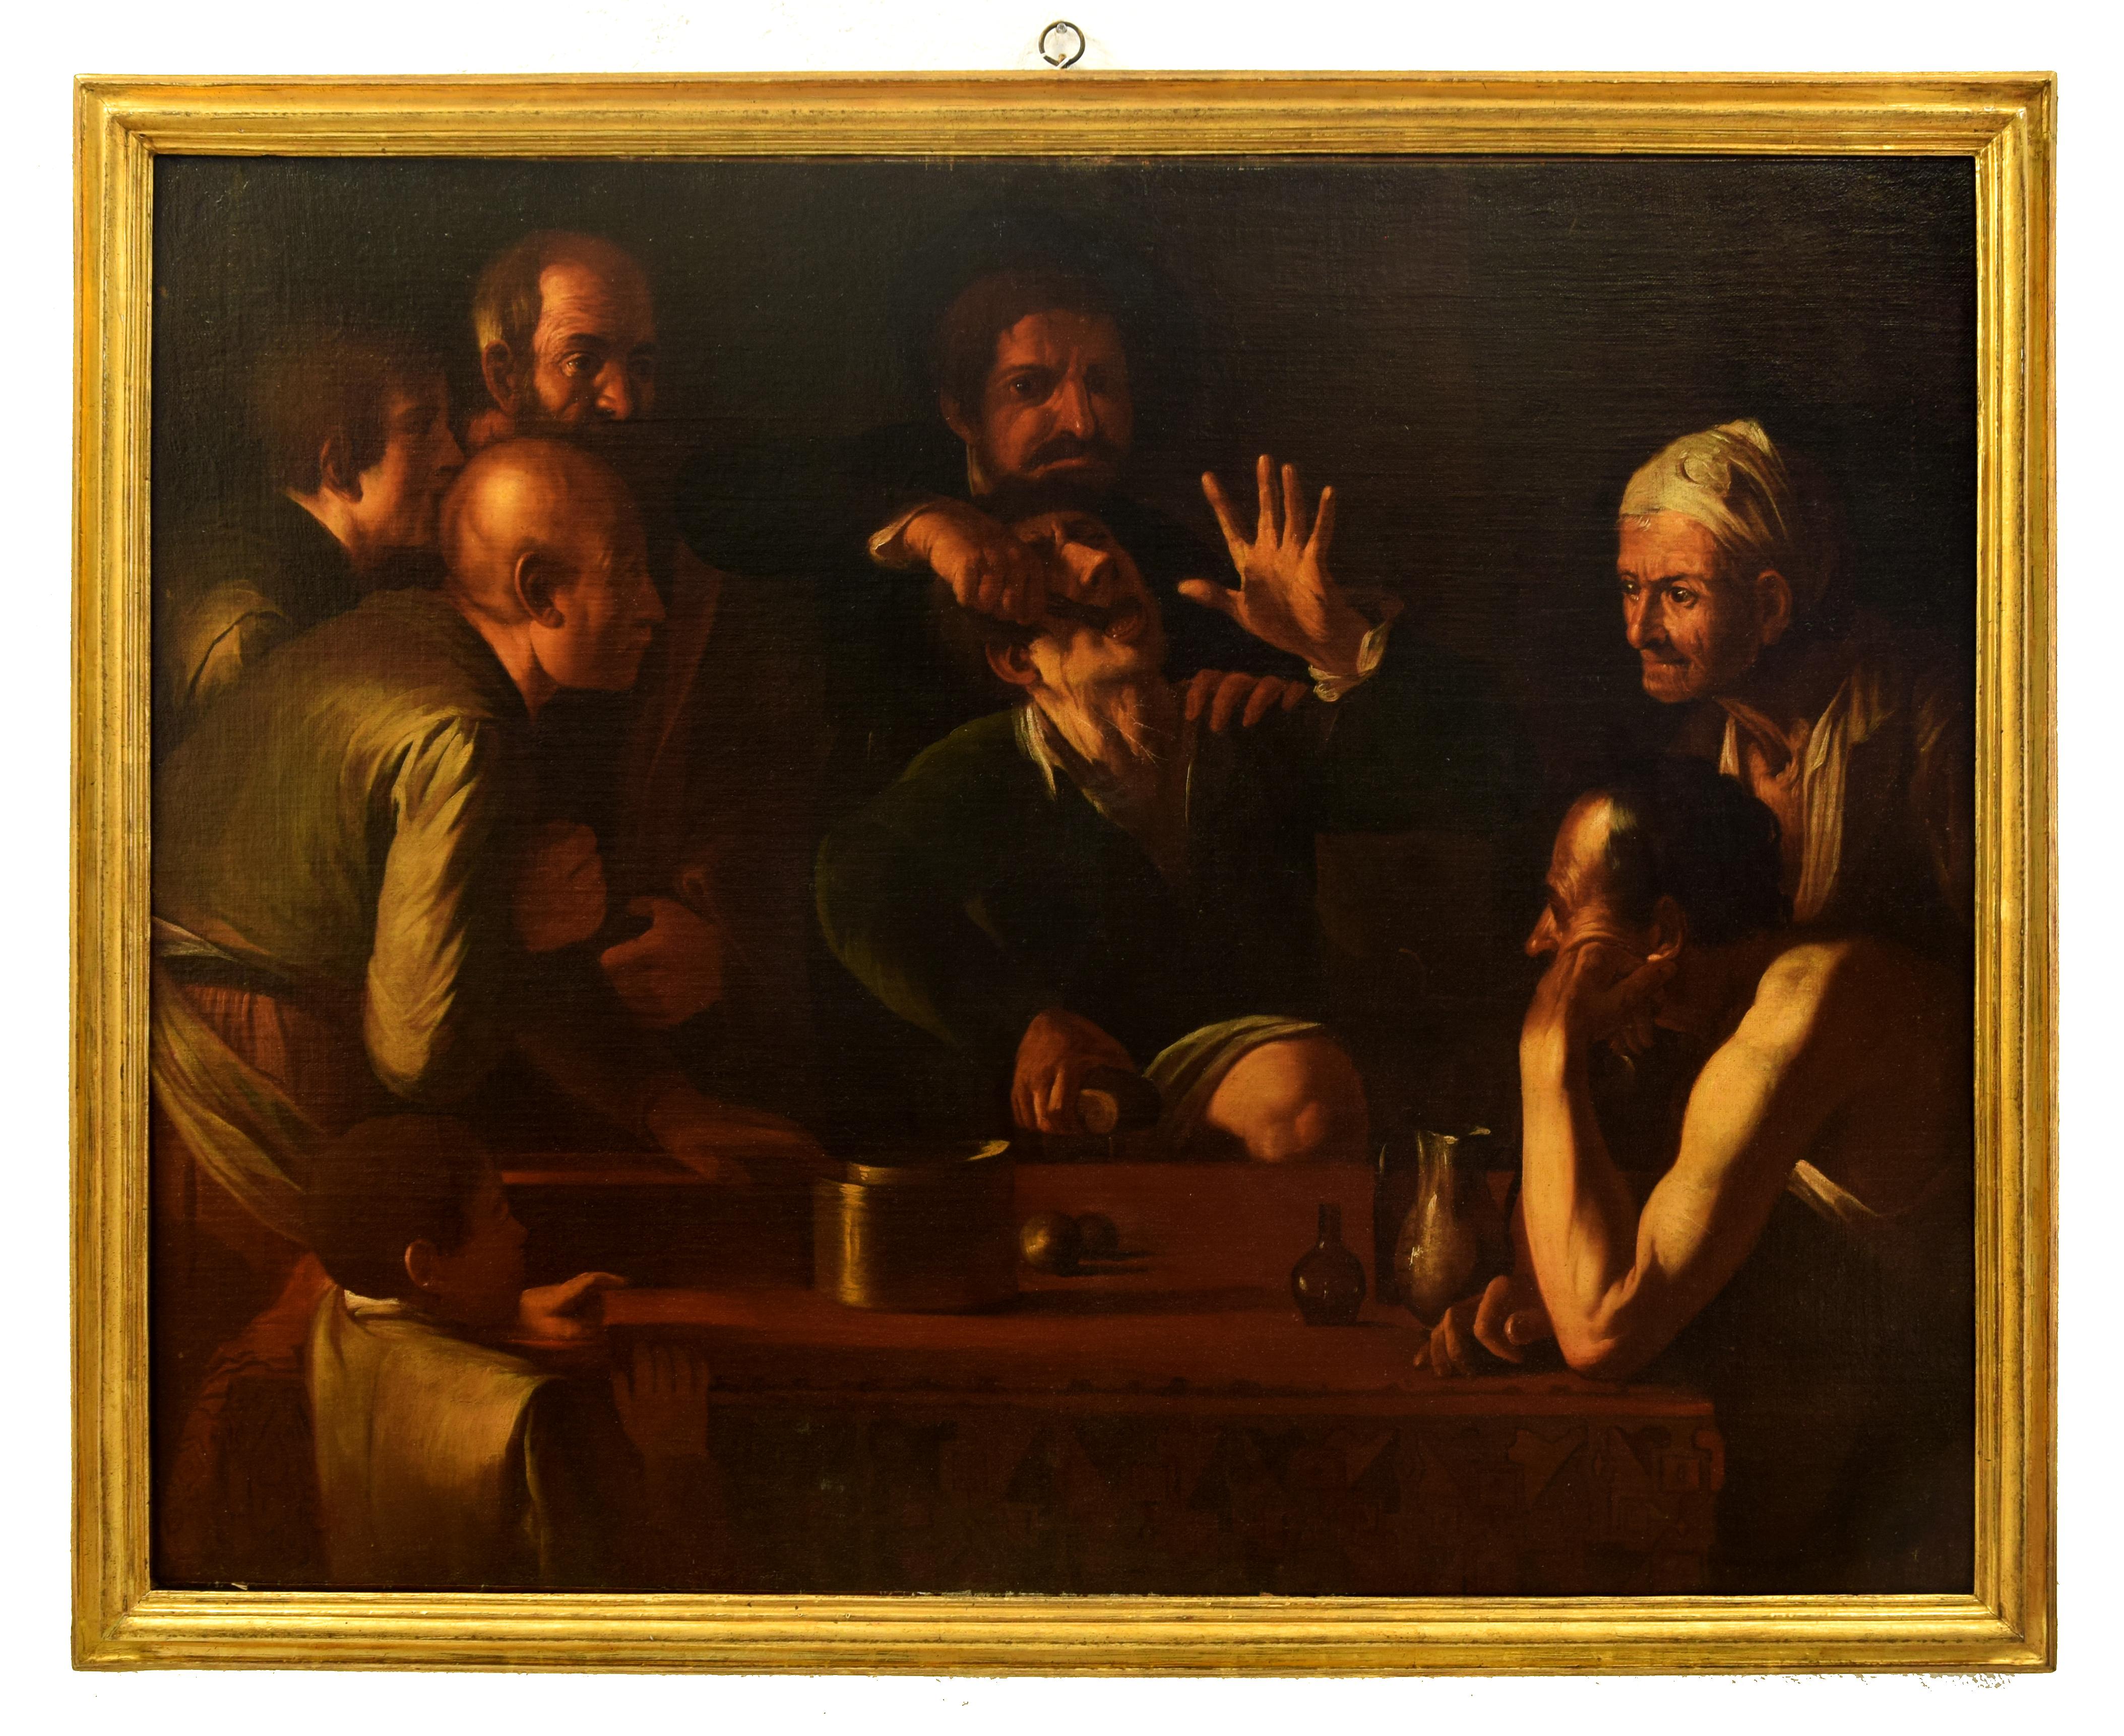 Follower of Caravaggio (Michelangelo Merisi) Figurative Painting - The Tooth-Puller (Il Cavadenti) - Oil on Canvas by Follower of Caravaggio 